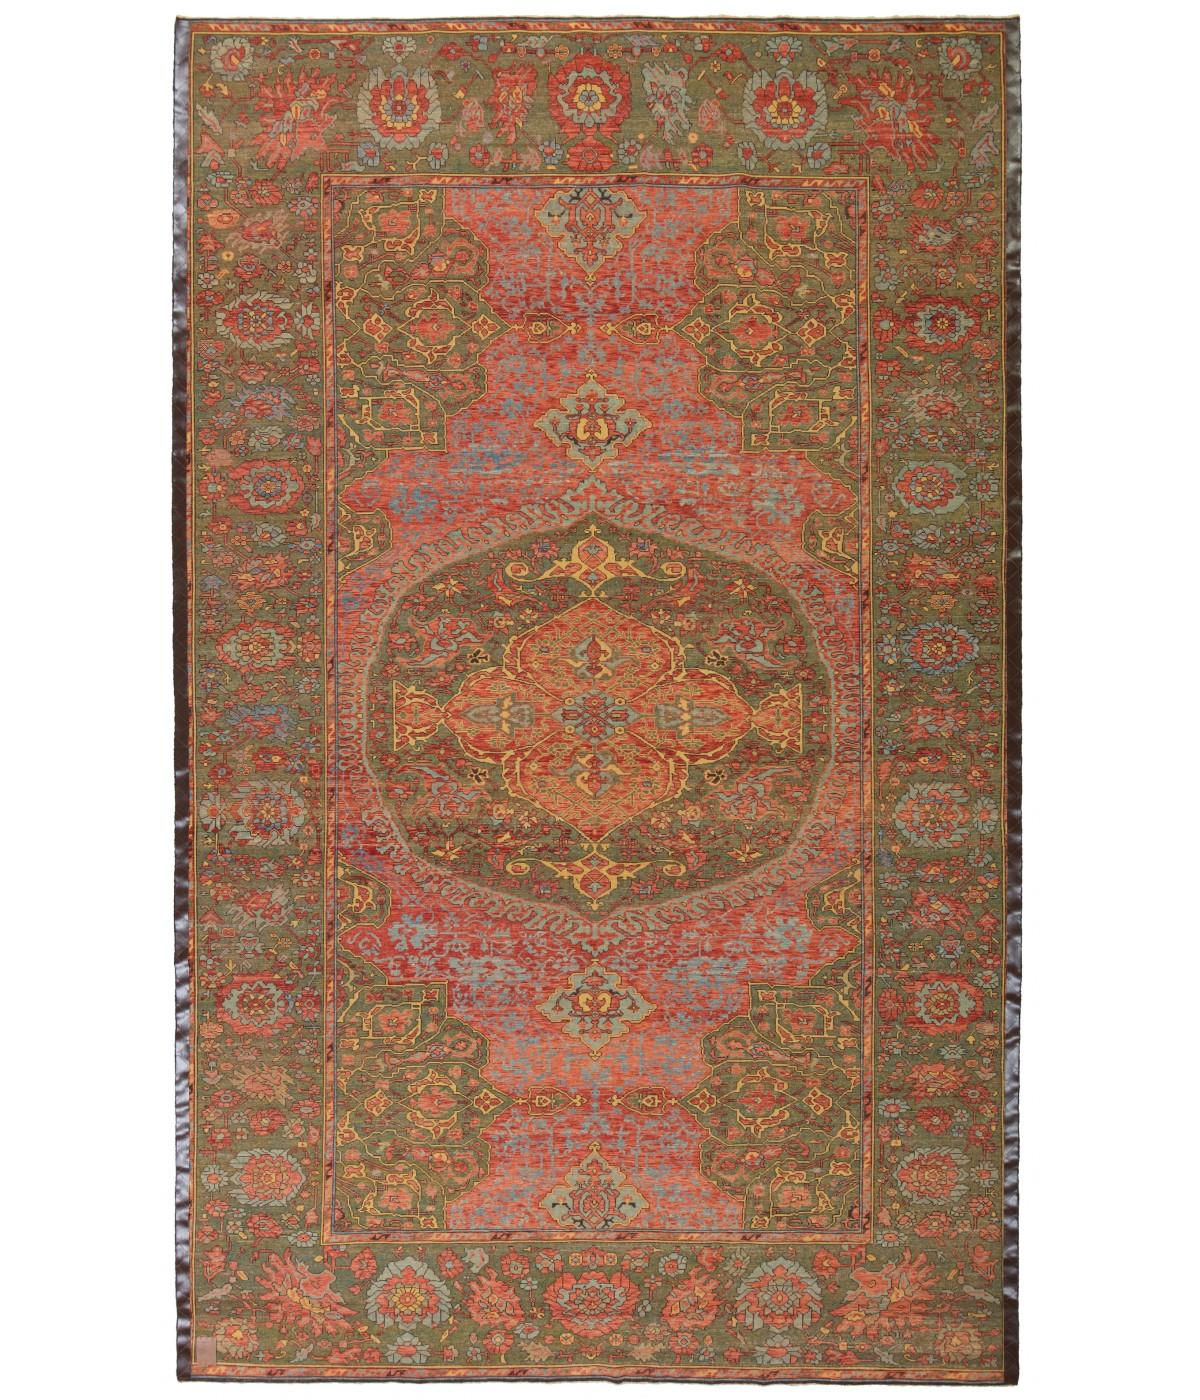 The source of the carpet comes from the book How to Read – Islamic Carpets, Walter B. Denny, The Metropolitan Museum of Art, New York 2014 fig.58 and Antique Rugs from the Near East, Wilhelm von Bode and Ernst Kühnel, Klinkhardt & Biermann, Berlin